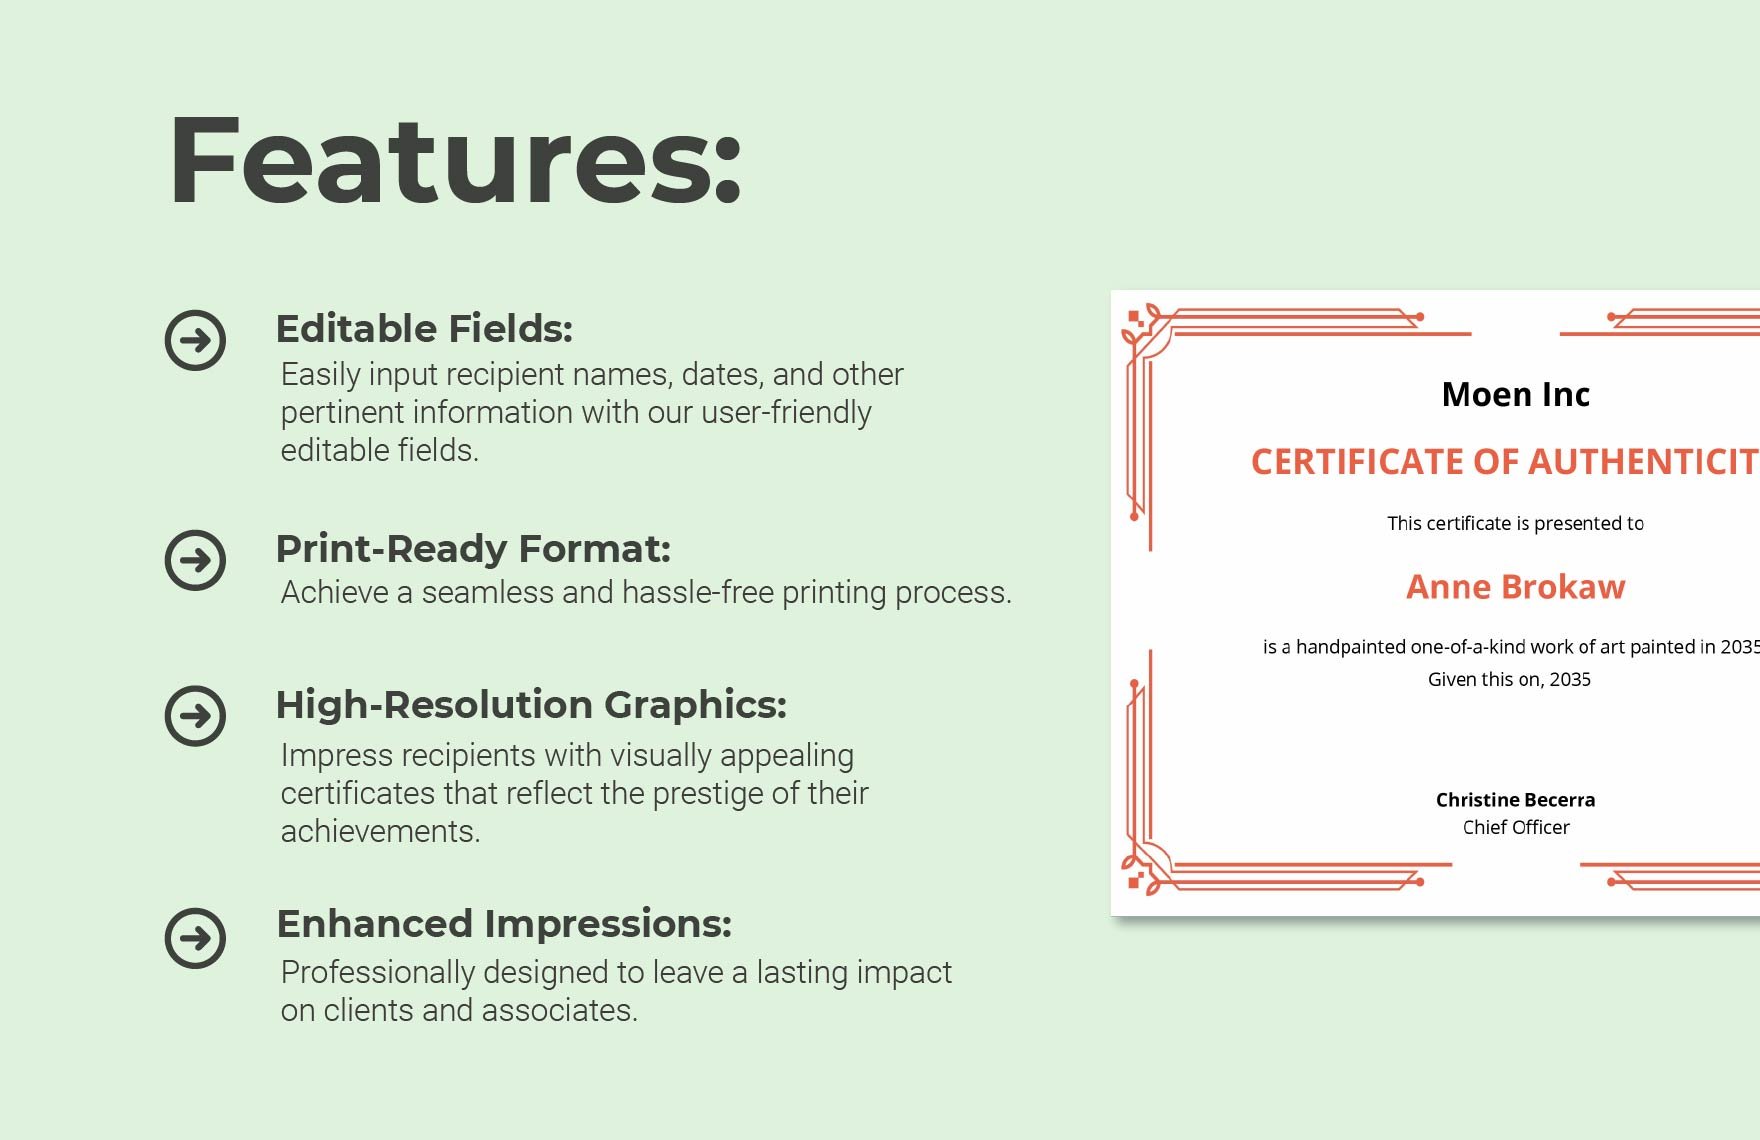 Blank Certificate Of Authenticity Template